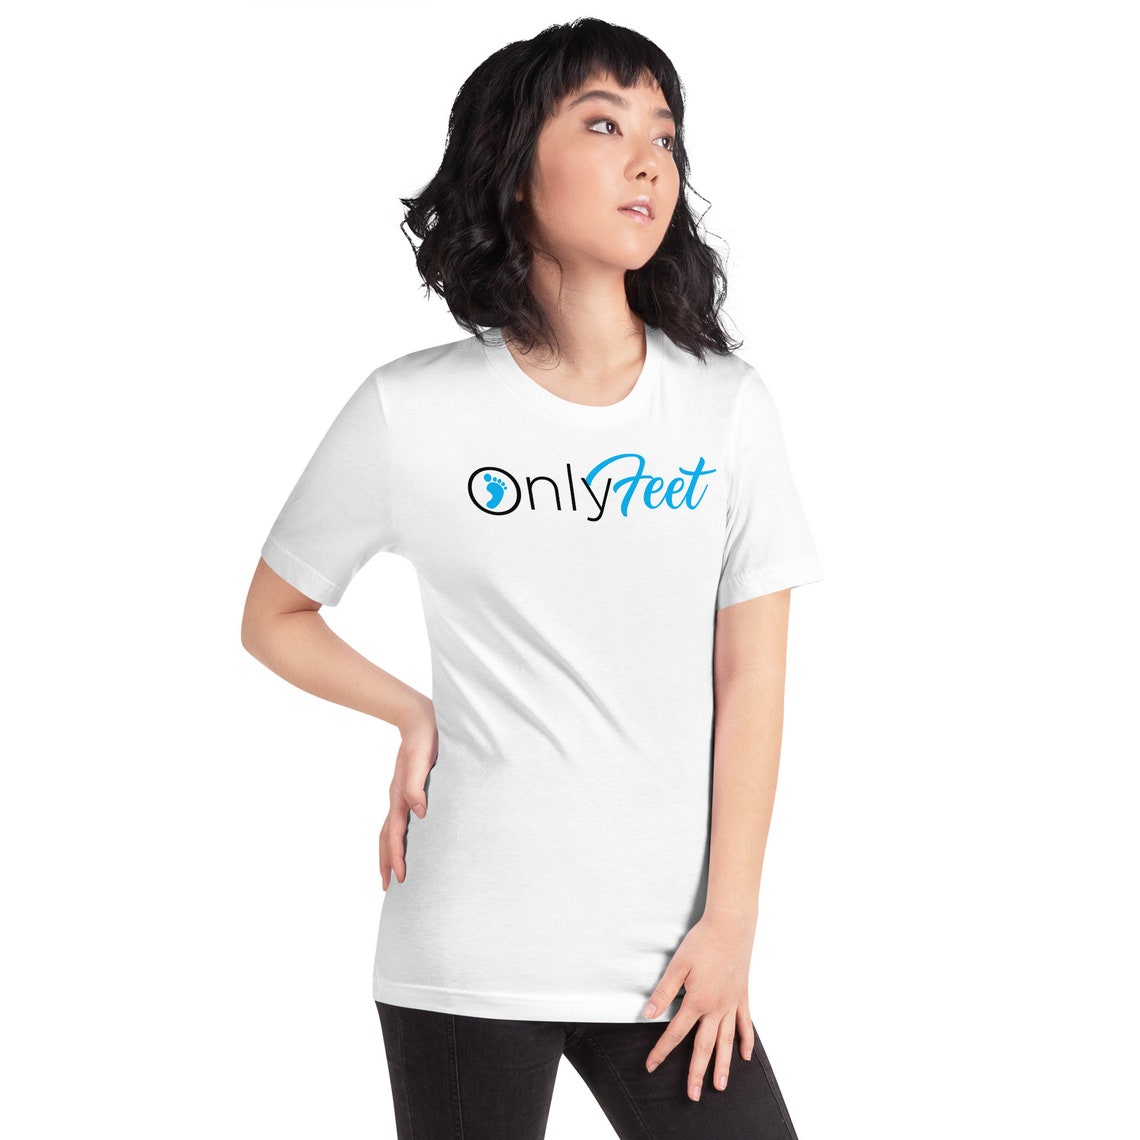 Only Feet Hilarious Onlyfans Parody T-shirt - Etsy